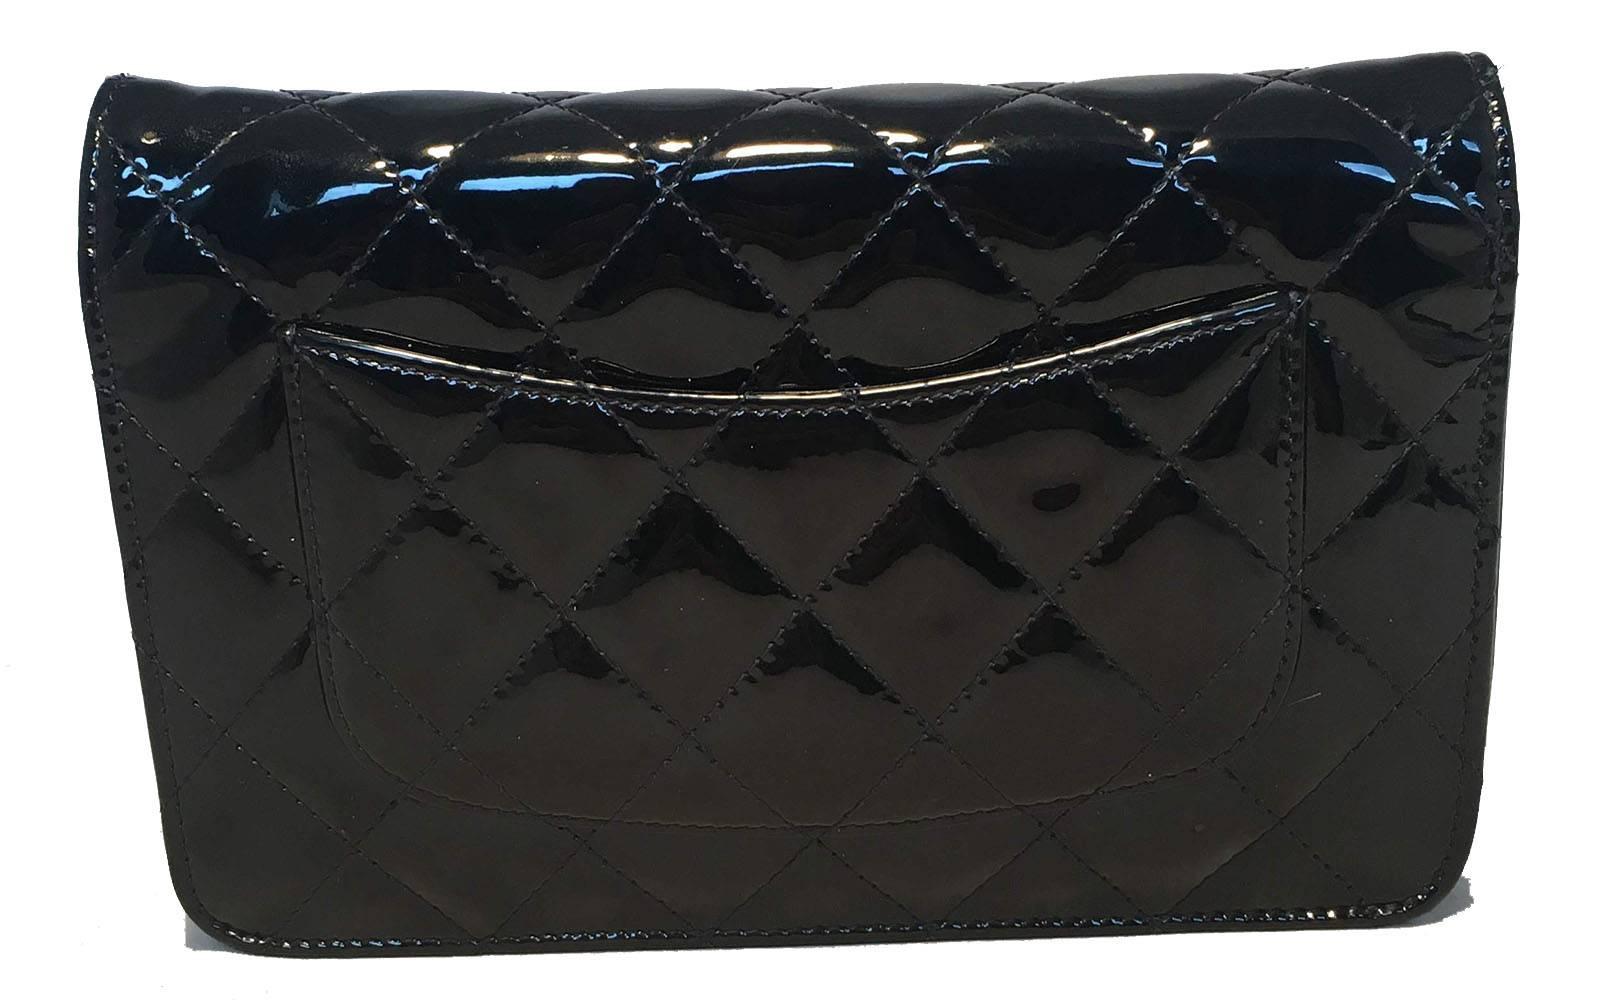 Fabulous Chanel Black Patent Quilted WOC Wallet on a Chain Shoulder Bag in excellent condition.  Black quilted patent leather exterior trimmed with silver hardware and signature woven chain and leather shoulder strap. Snap single flap closure opens